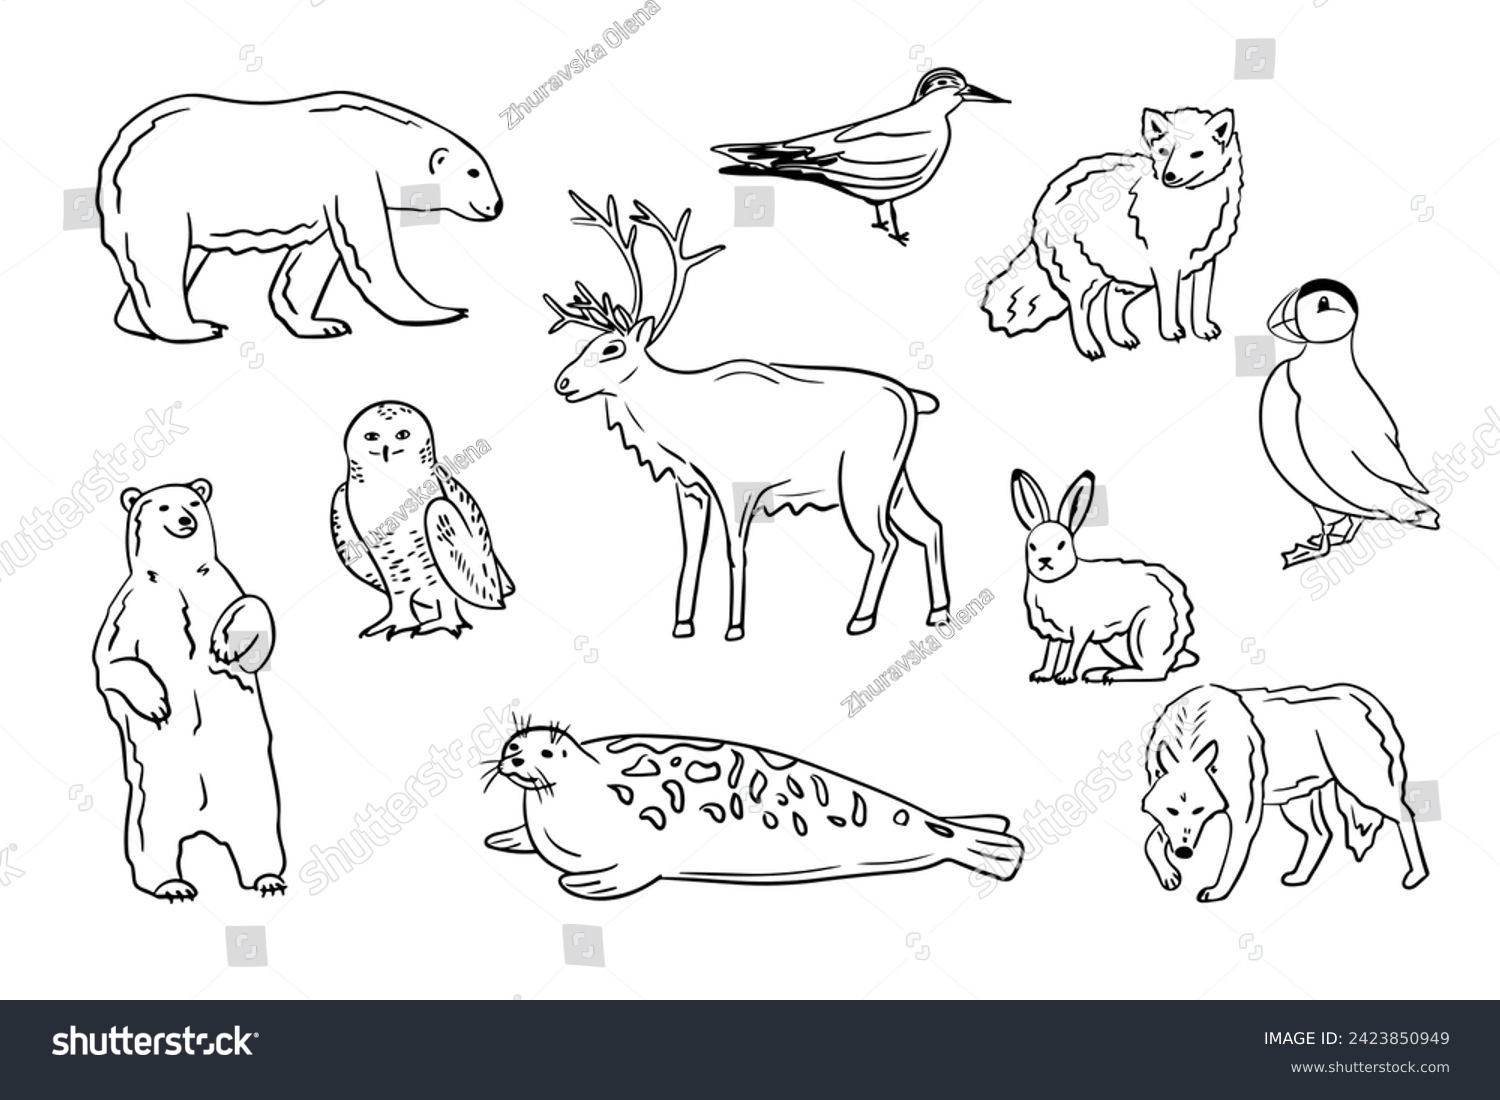 SVG of Contour hand drawn arctic animals and birds set. Doodle outline polar bear, reindeer, snow owl, Atlantic puffin on white background. Ideal for coloring pages, tattoo, pattern svg